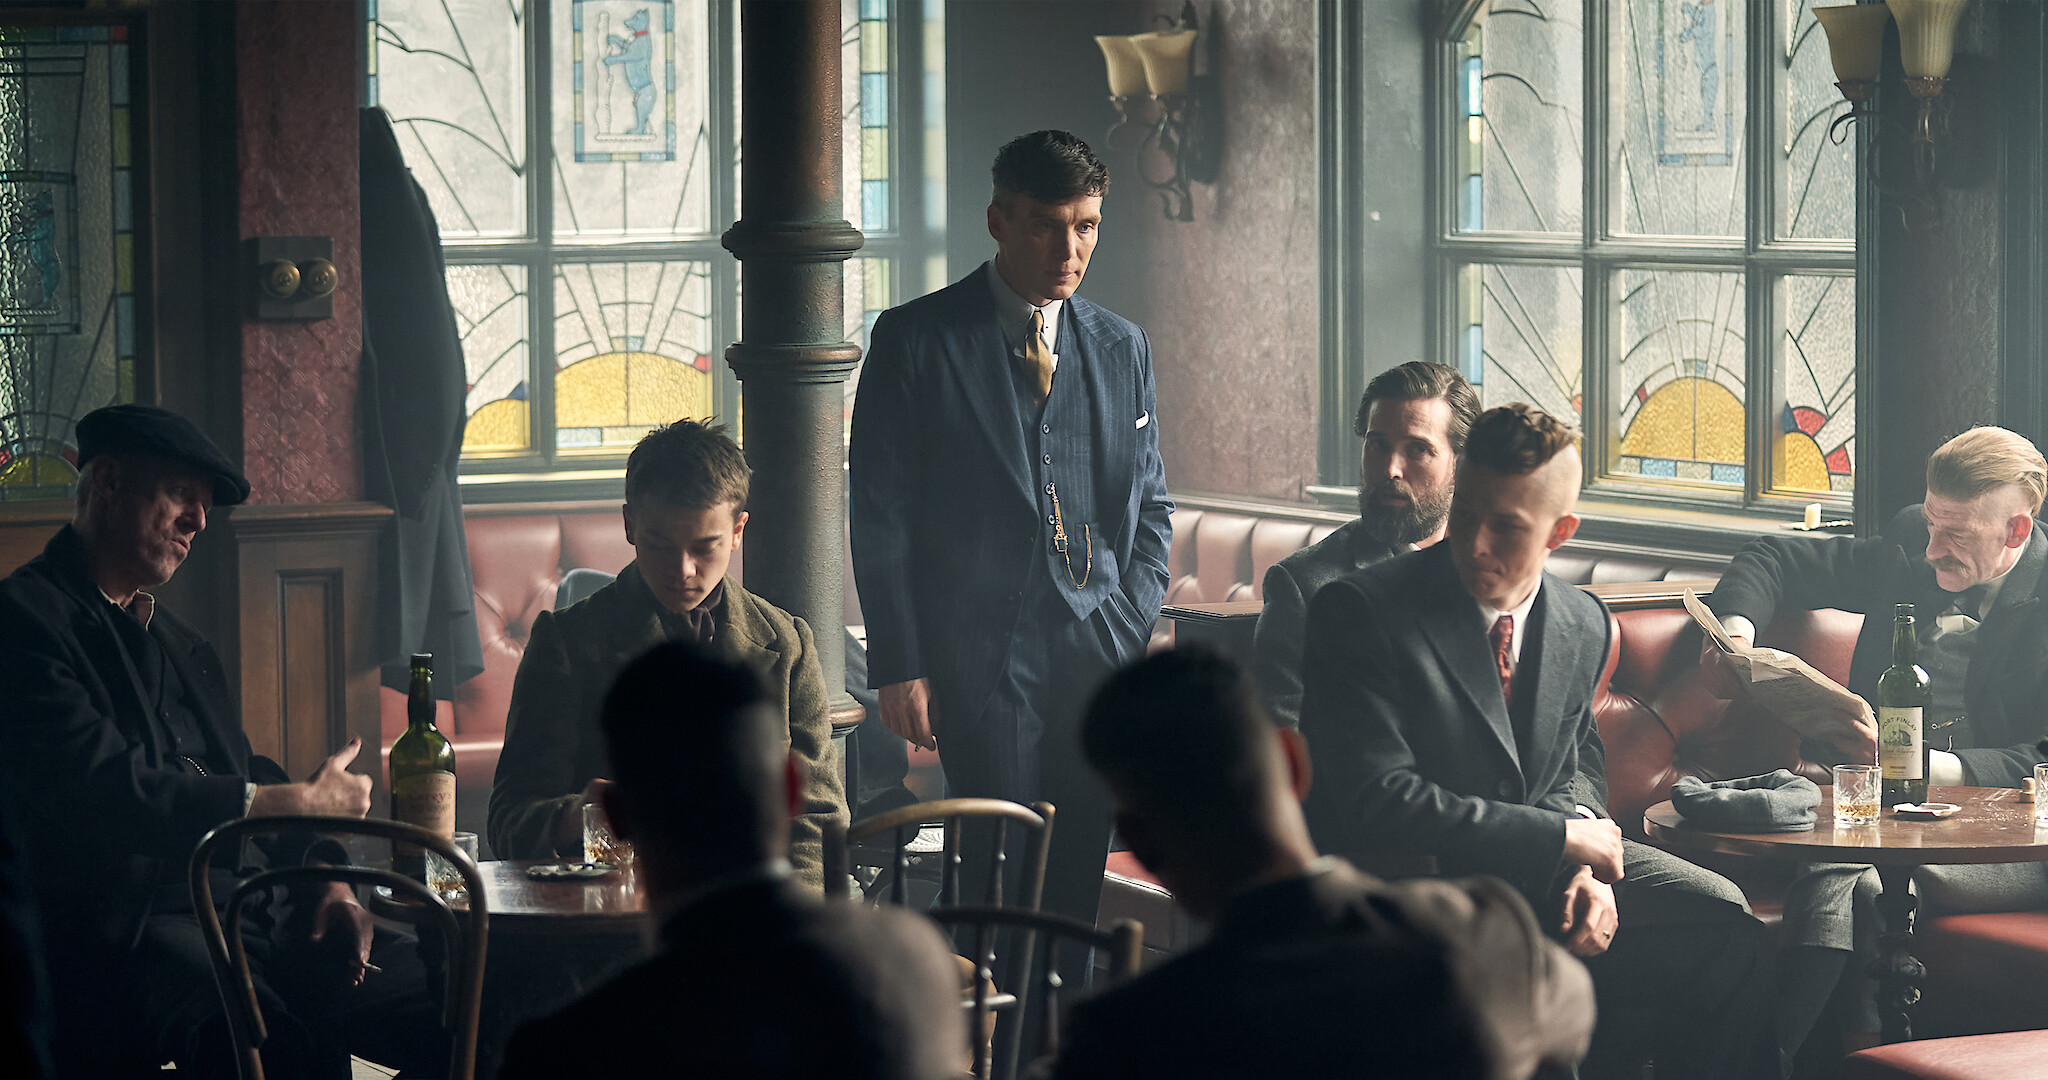 Peaky Blinders' London: A guide to the gang's…